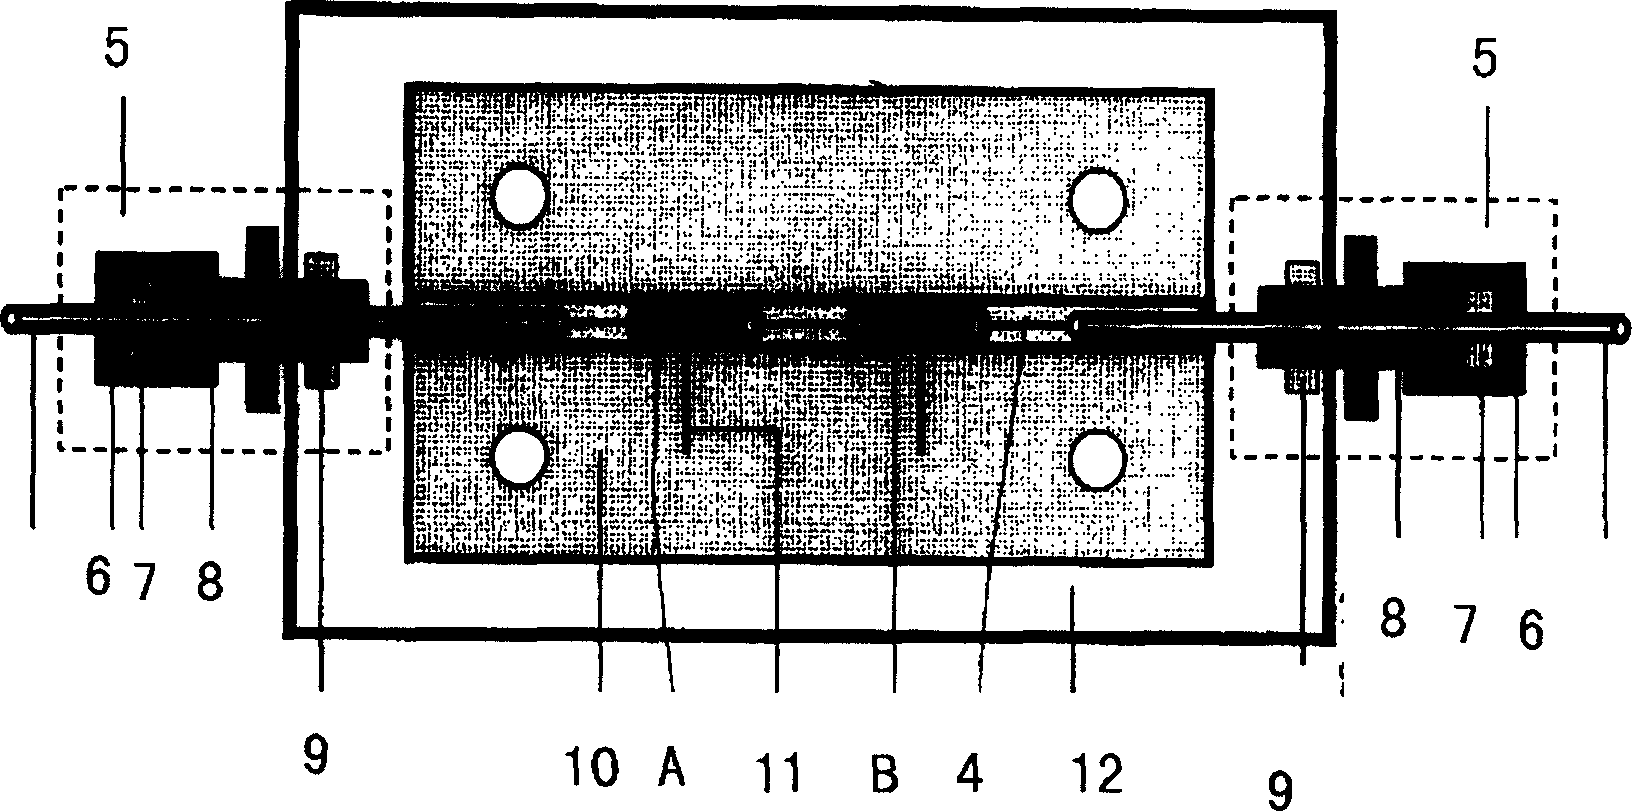 Non-contact conductivity detector and detection method